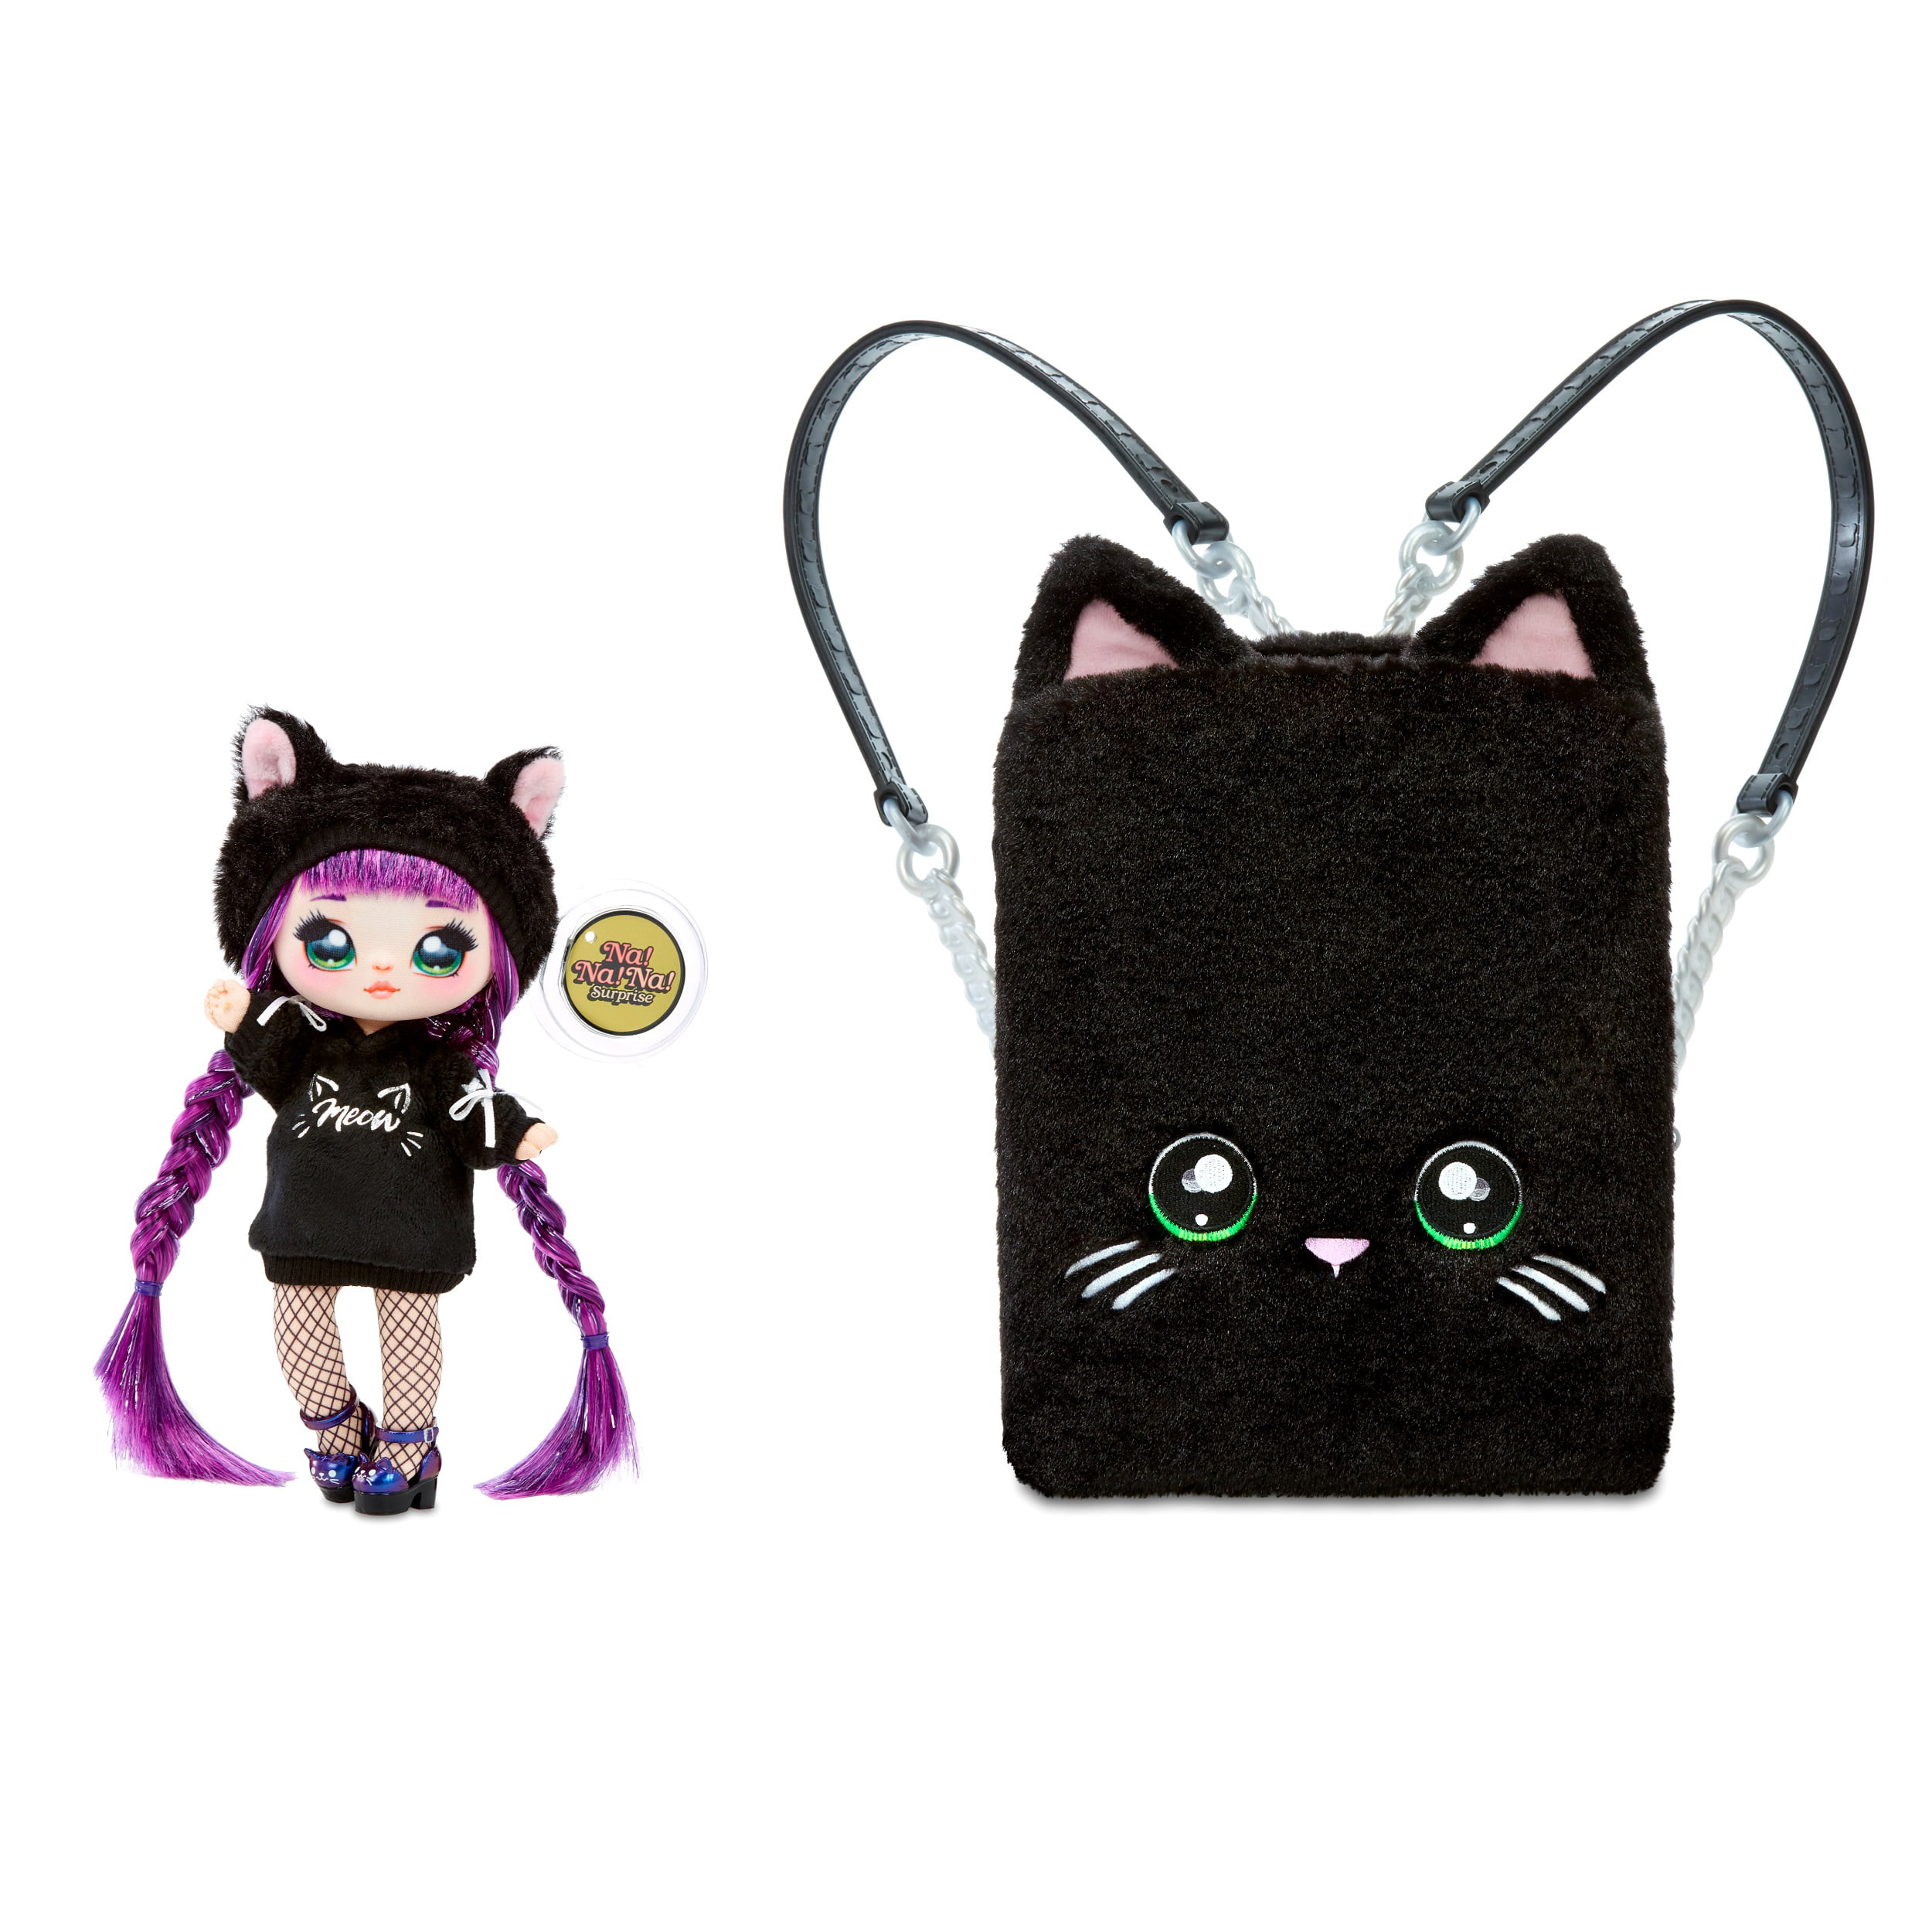 Buy Na! Na! Na! Surprise 3-in-1 Backpack Bedroom Black Kitty with ...